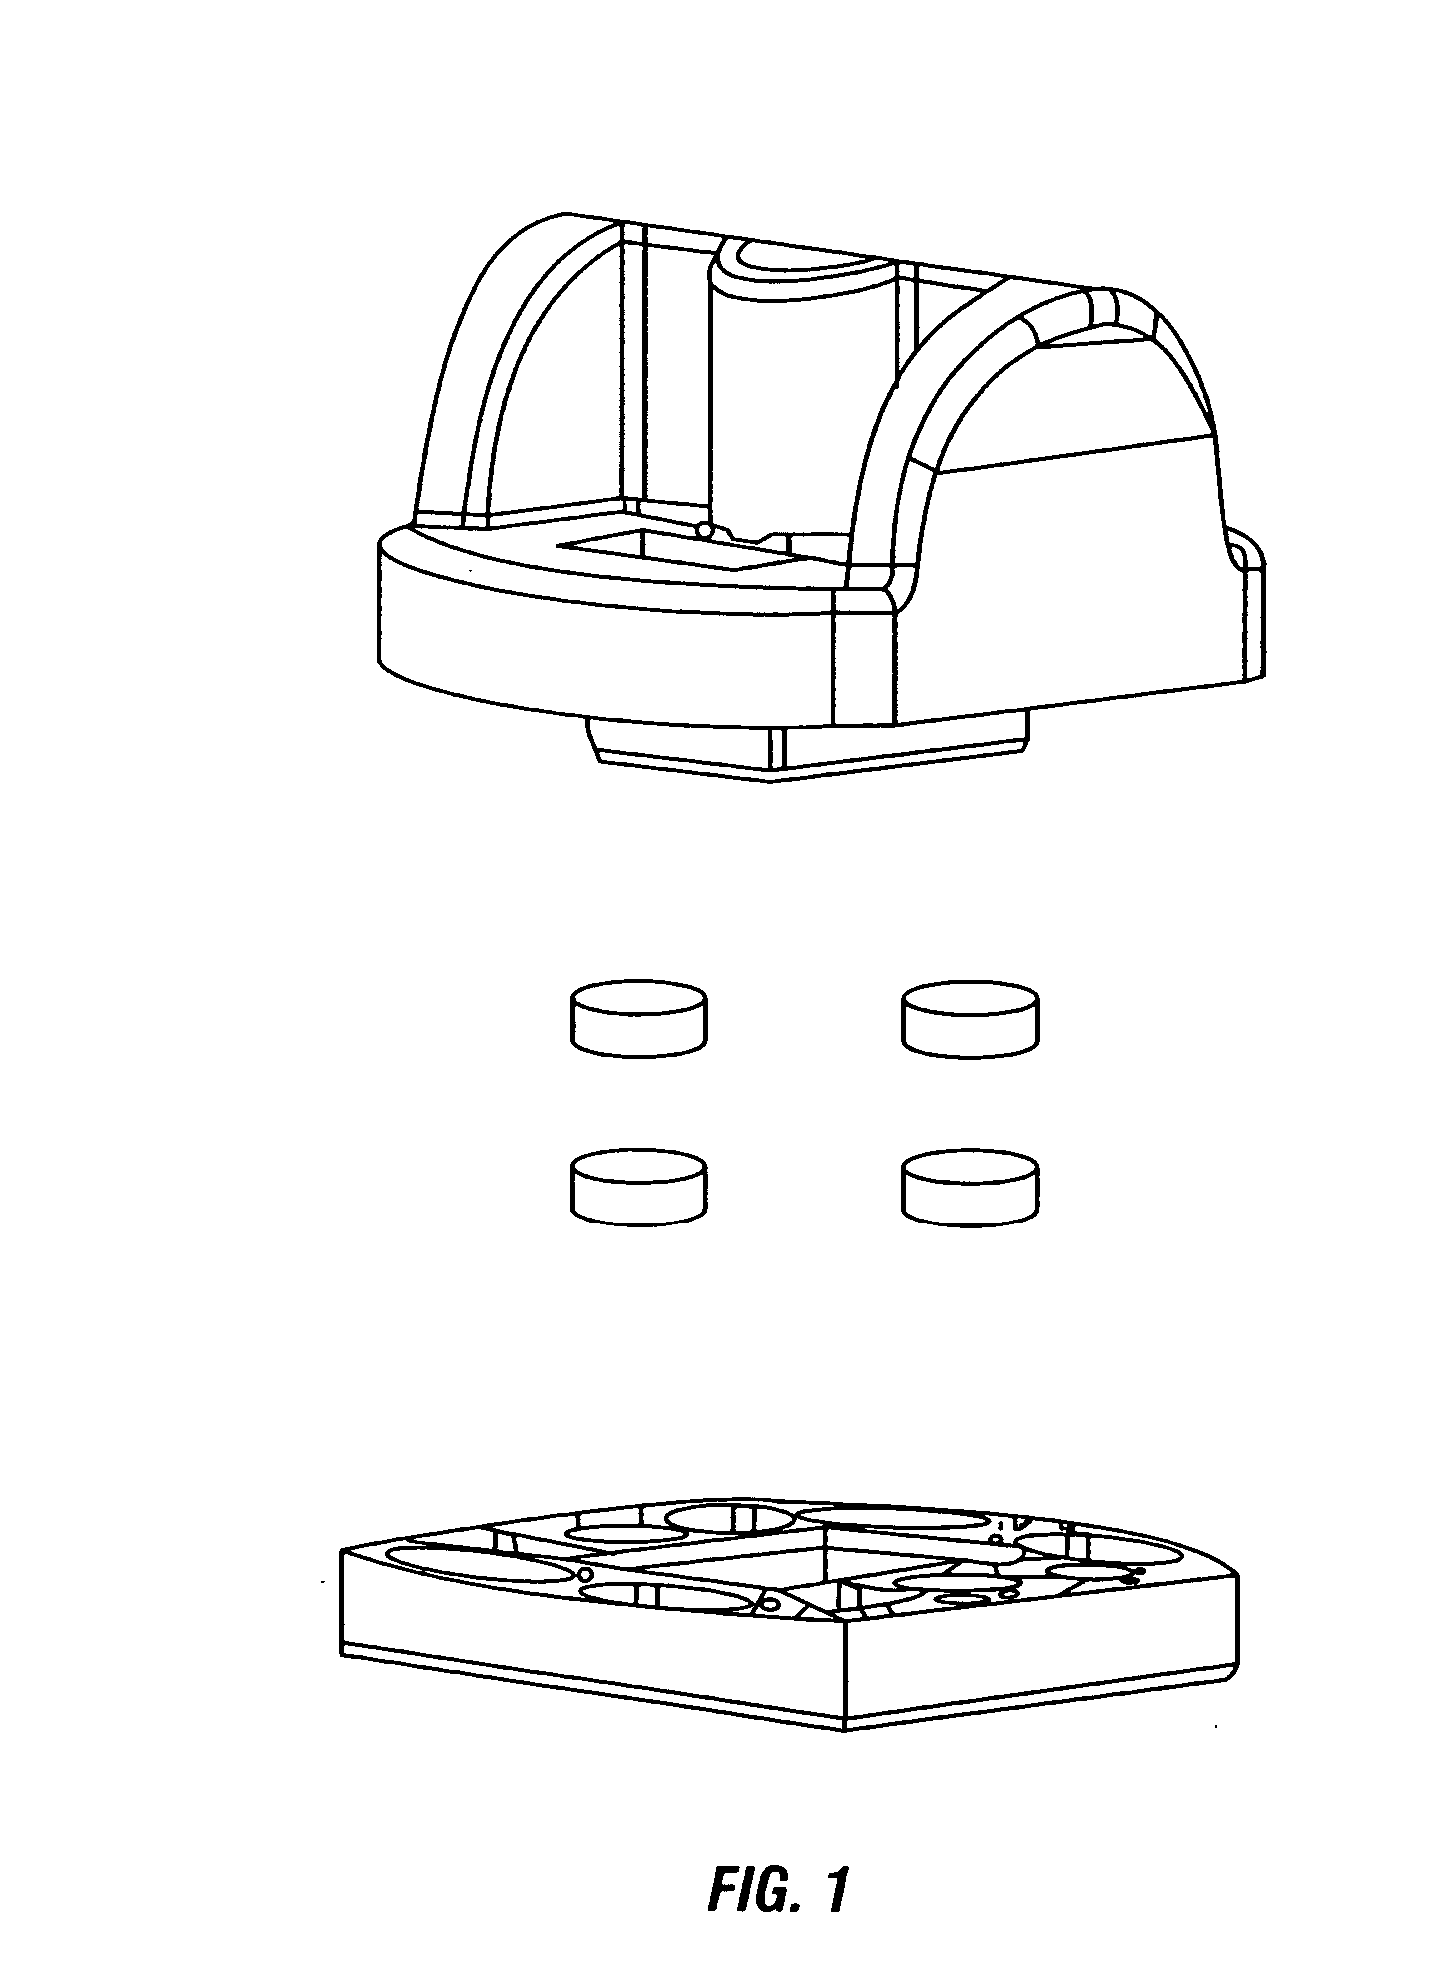 Method of sample control and calibration adjustment for use with a noninvasive analyzer